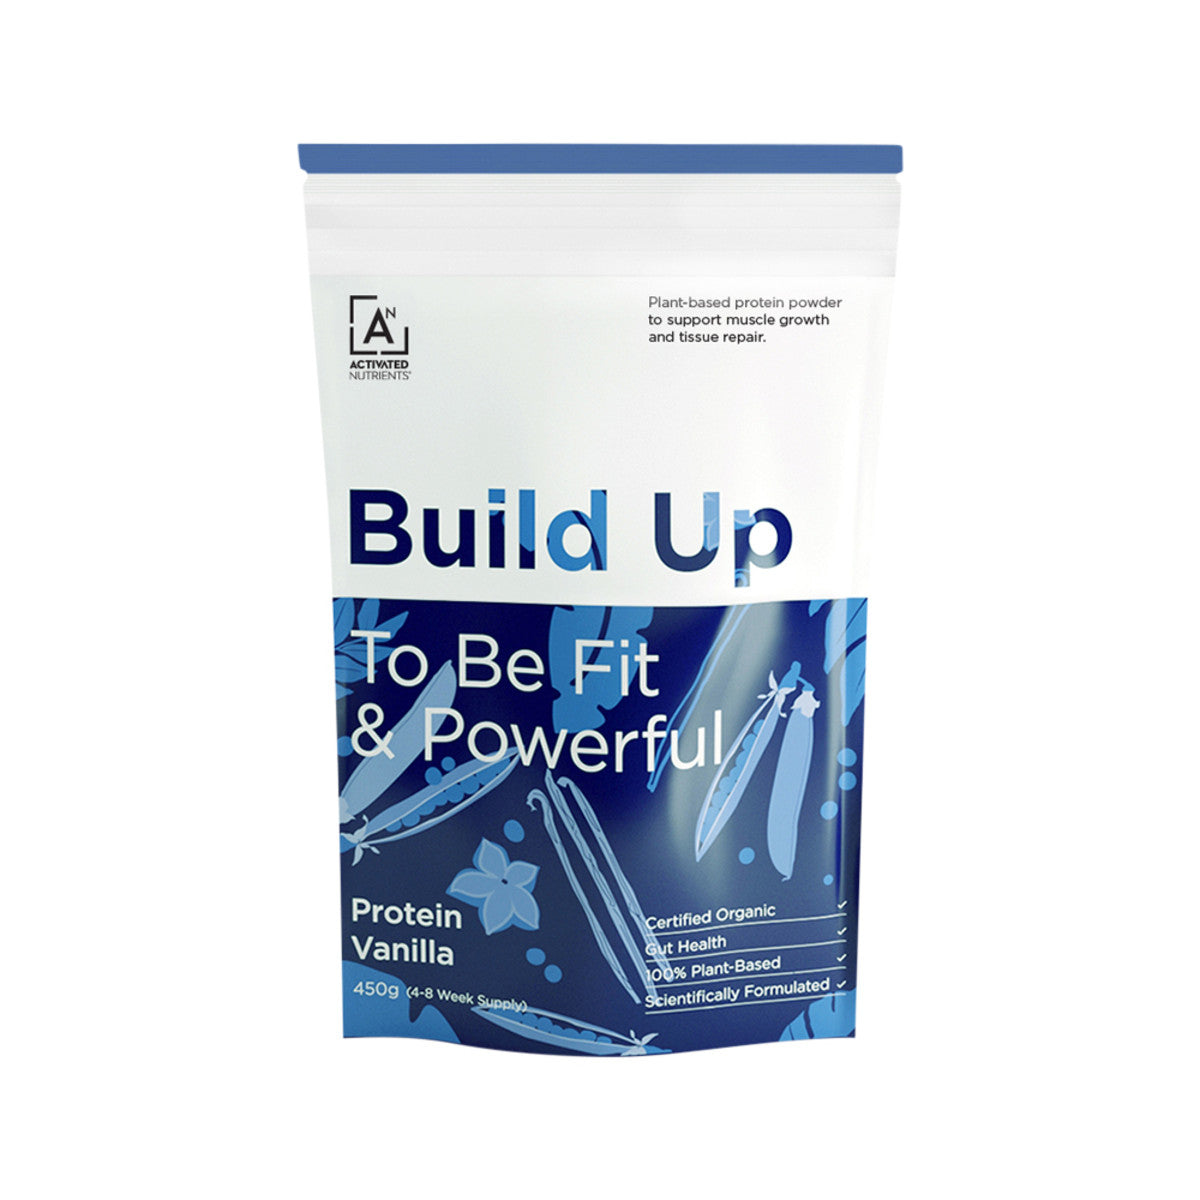 Activated Nutrients Organic Build Up Vanilla Protein (To Be Fit & Powerful) 450g